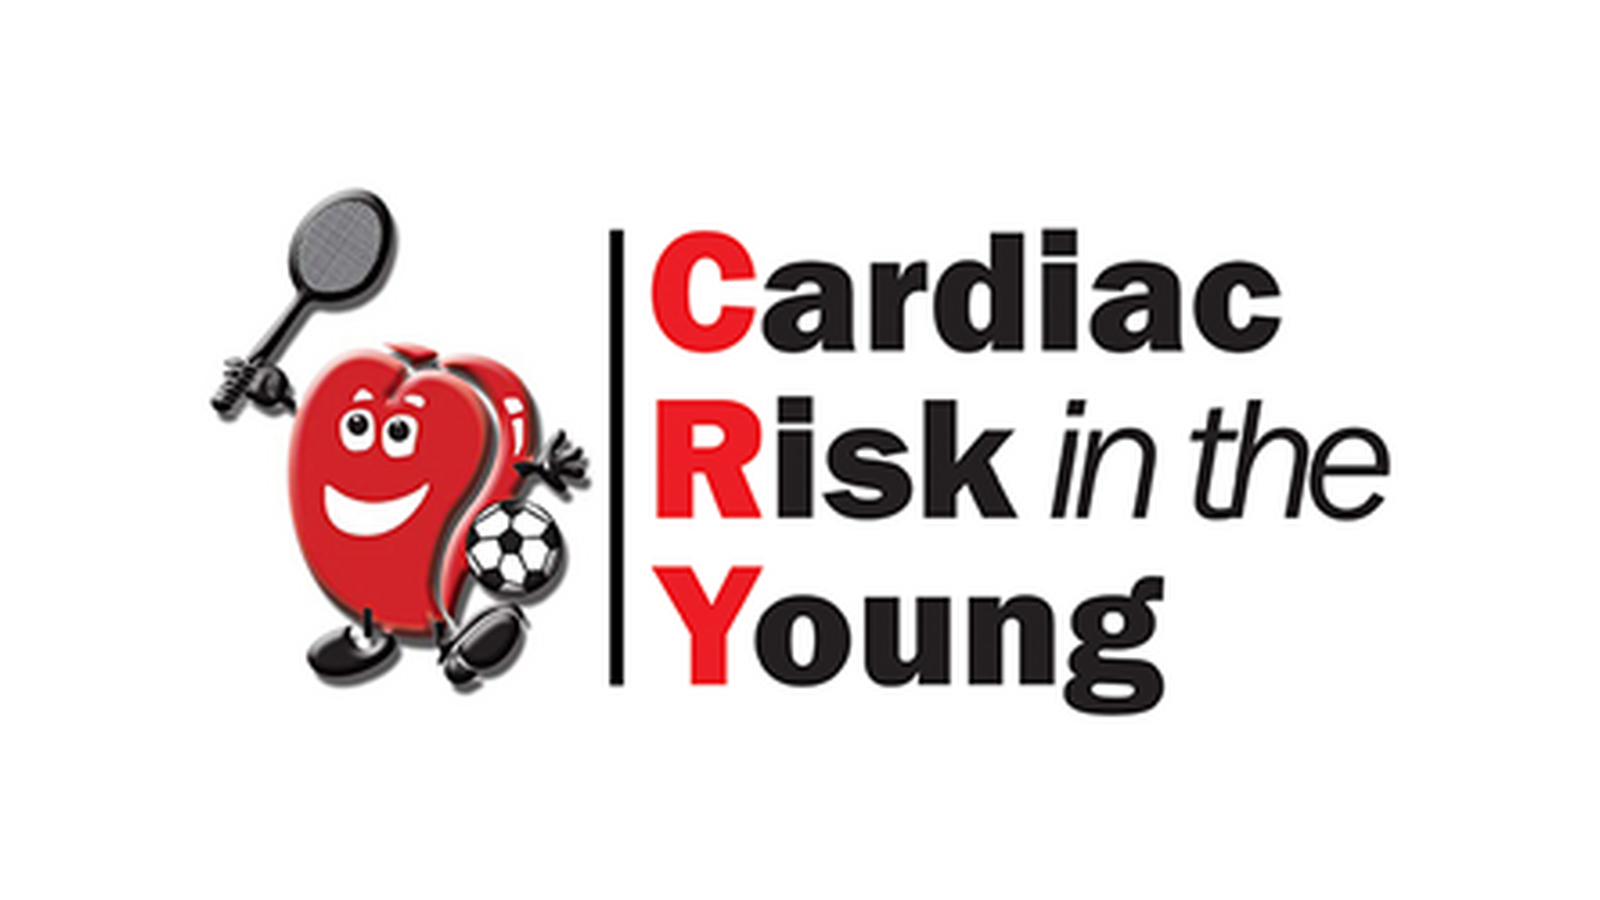 Cardiac Risk in the Young